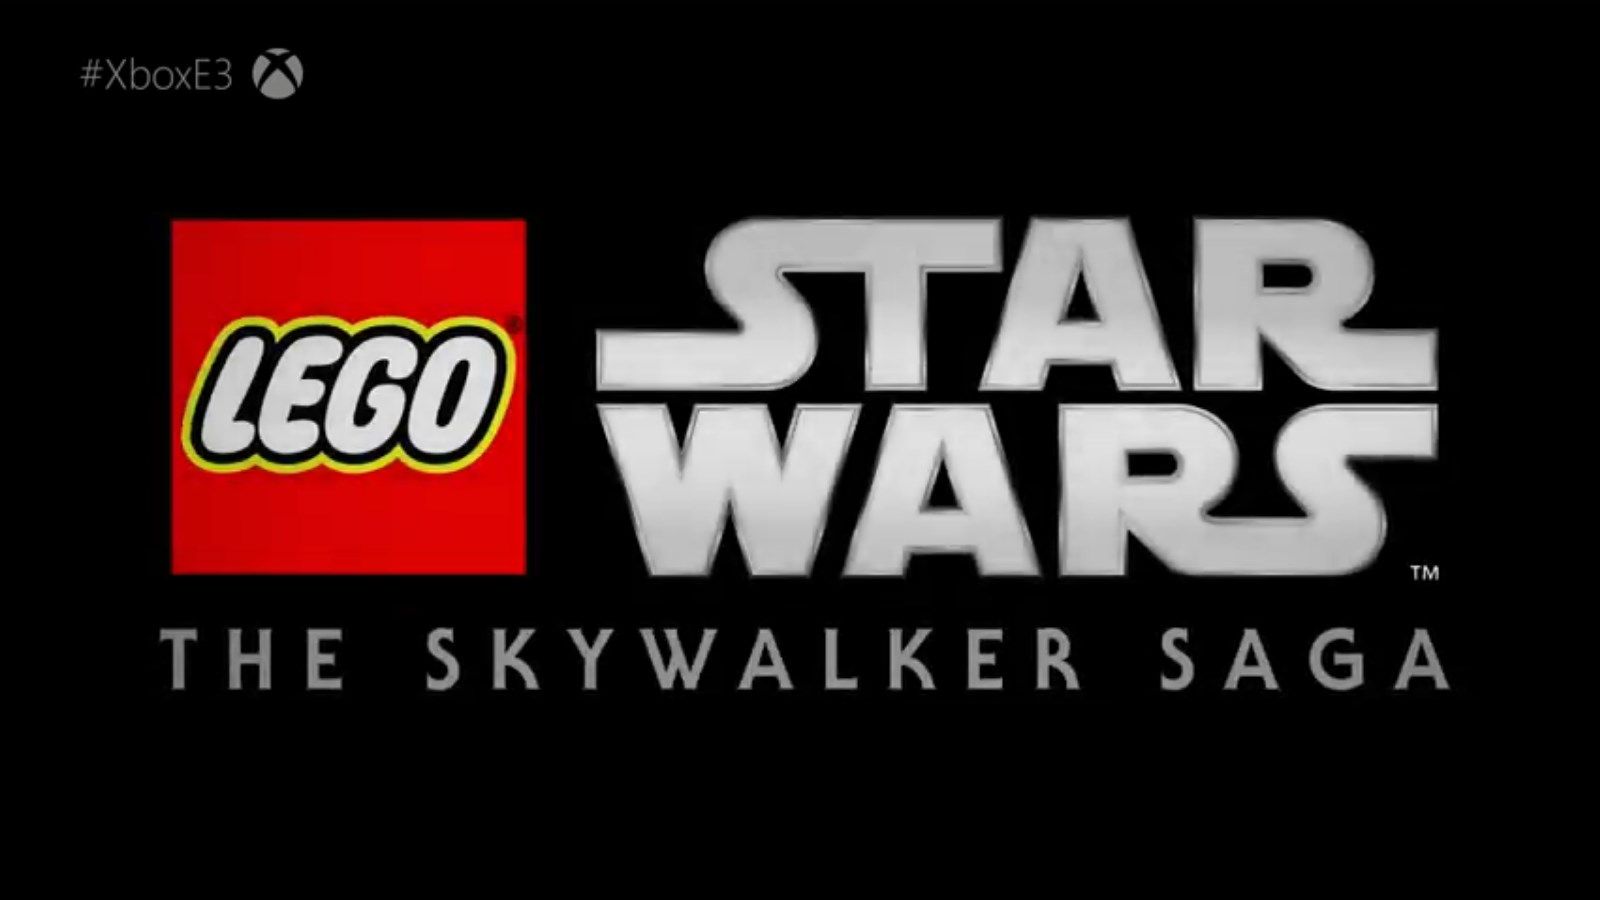 Lego Star Wars: The Skywalker Saga will collect all nine movies